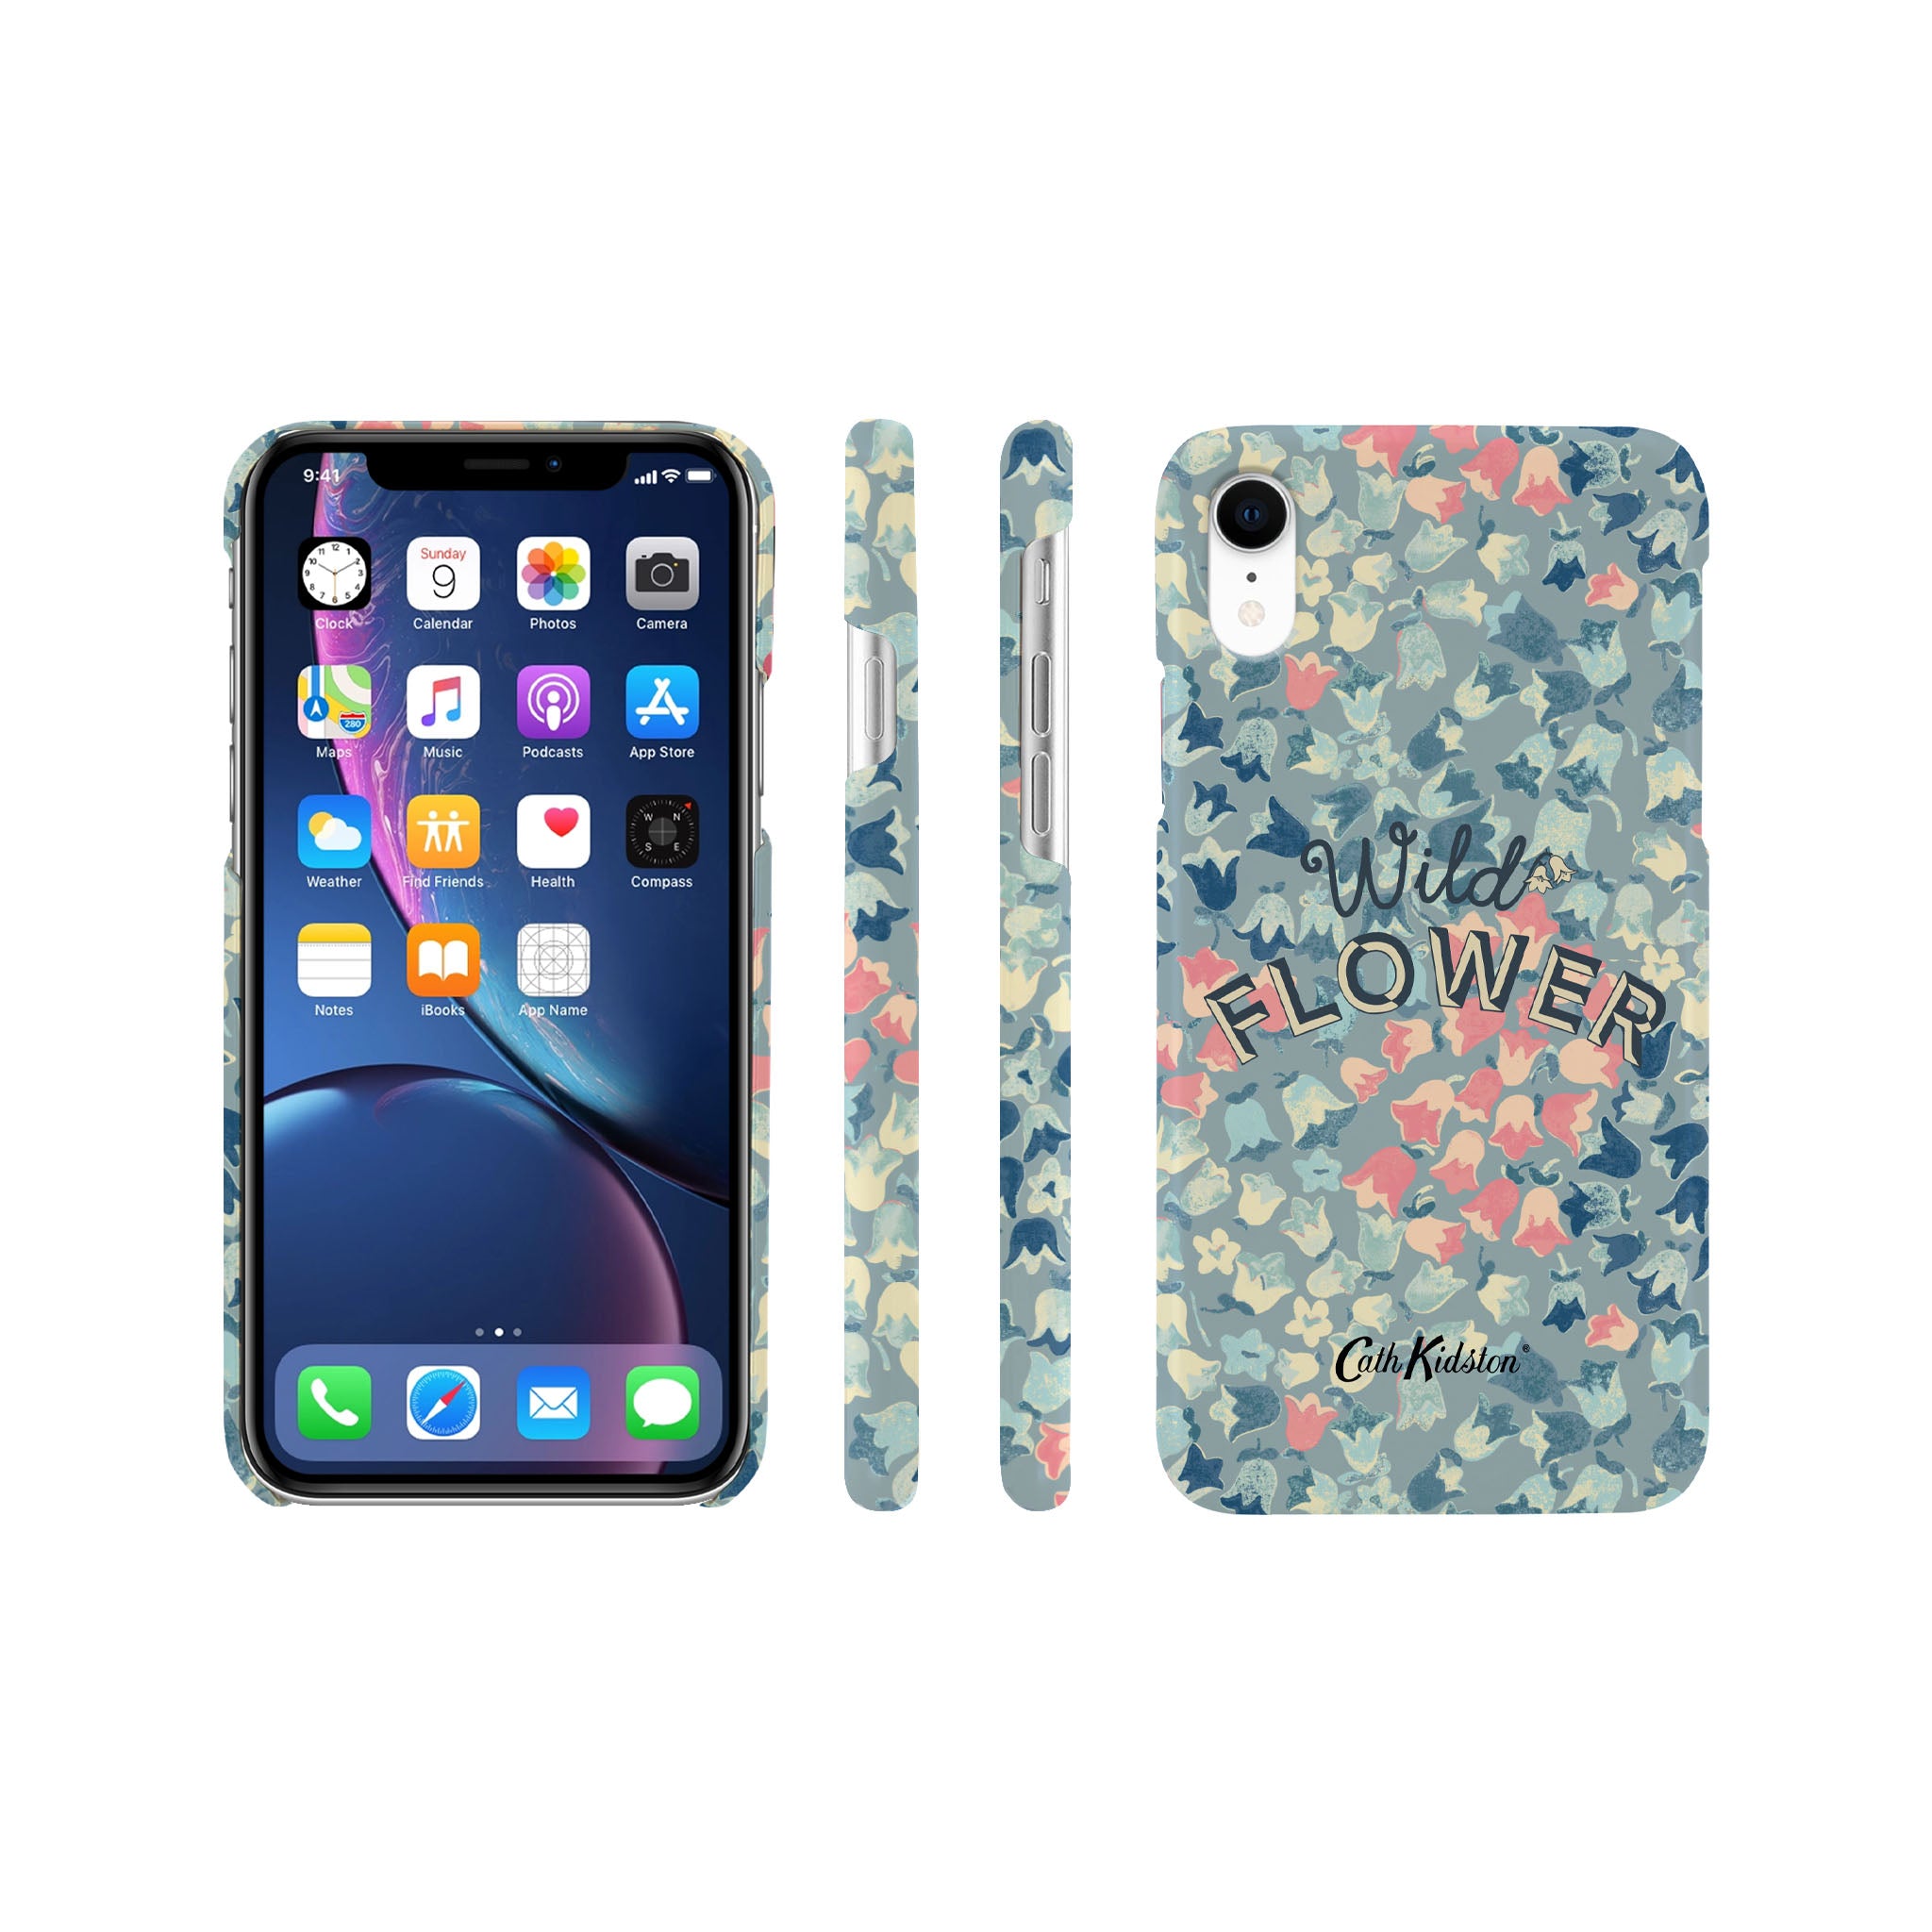 The MYVQ iPhone XR series premium high gloss scratch-resistant phone case. Featuring a luxurious microfiber insert to cradle and protect your smartphone device.  